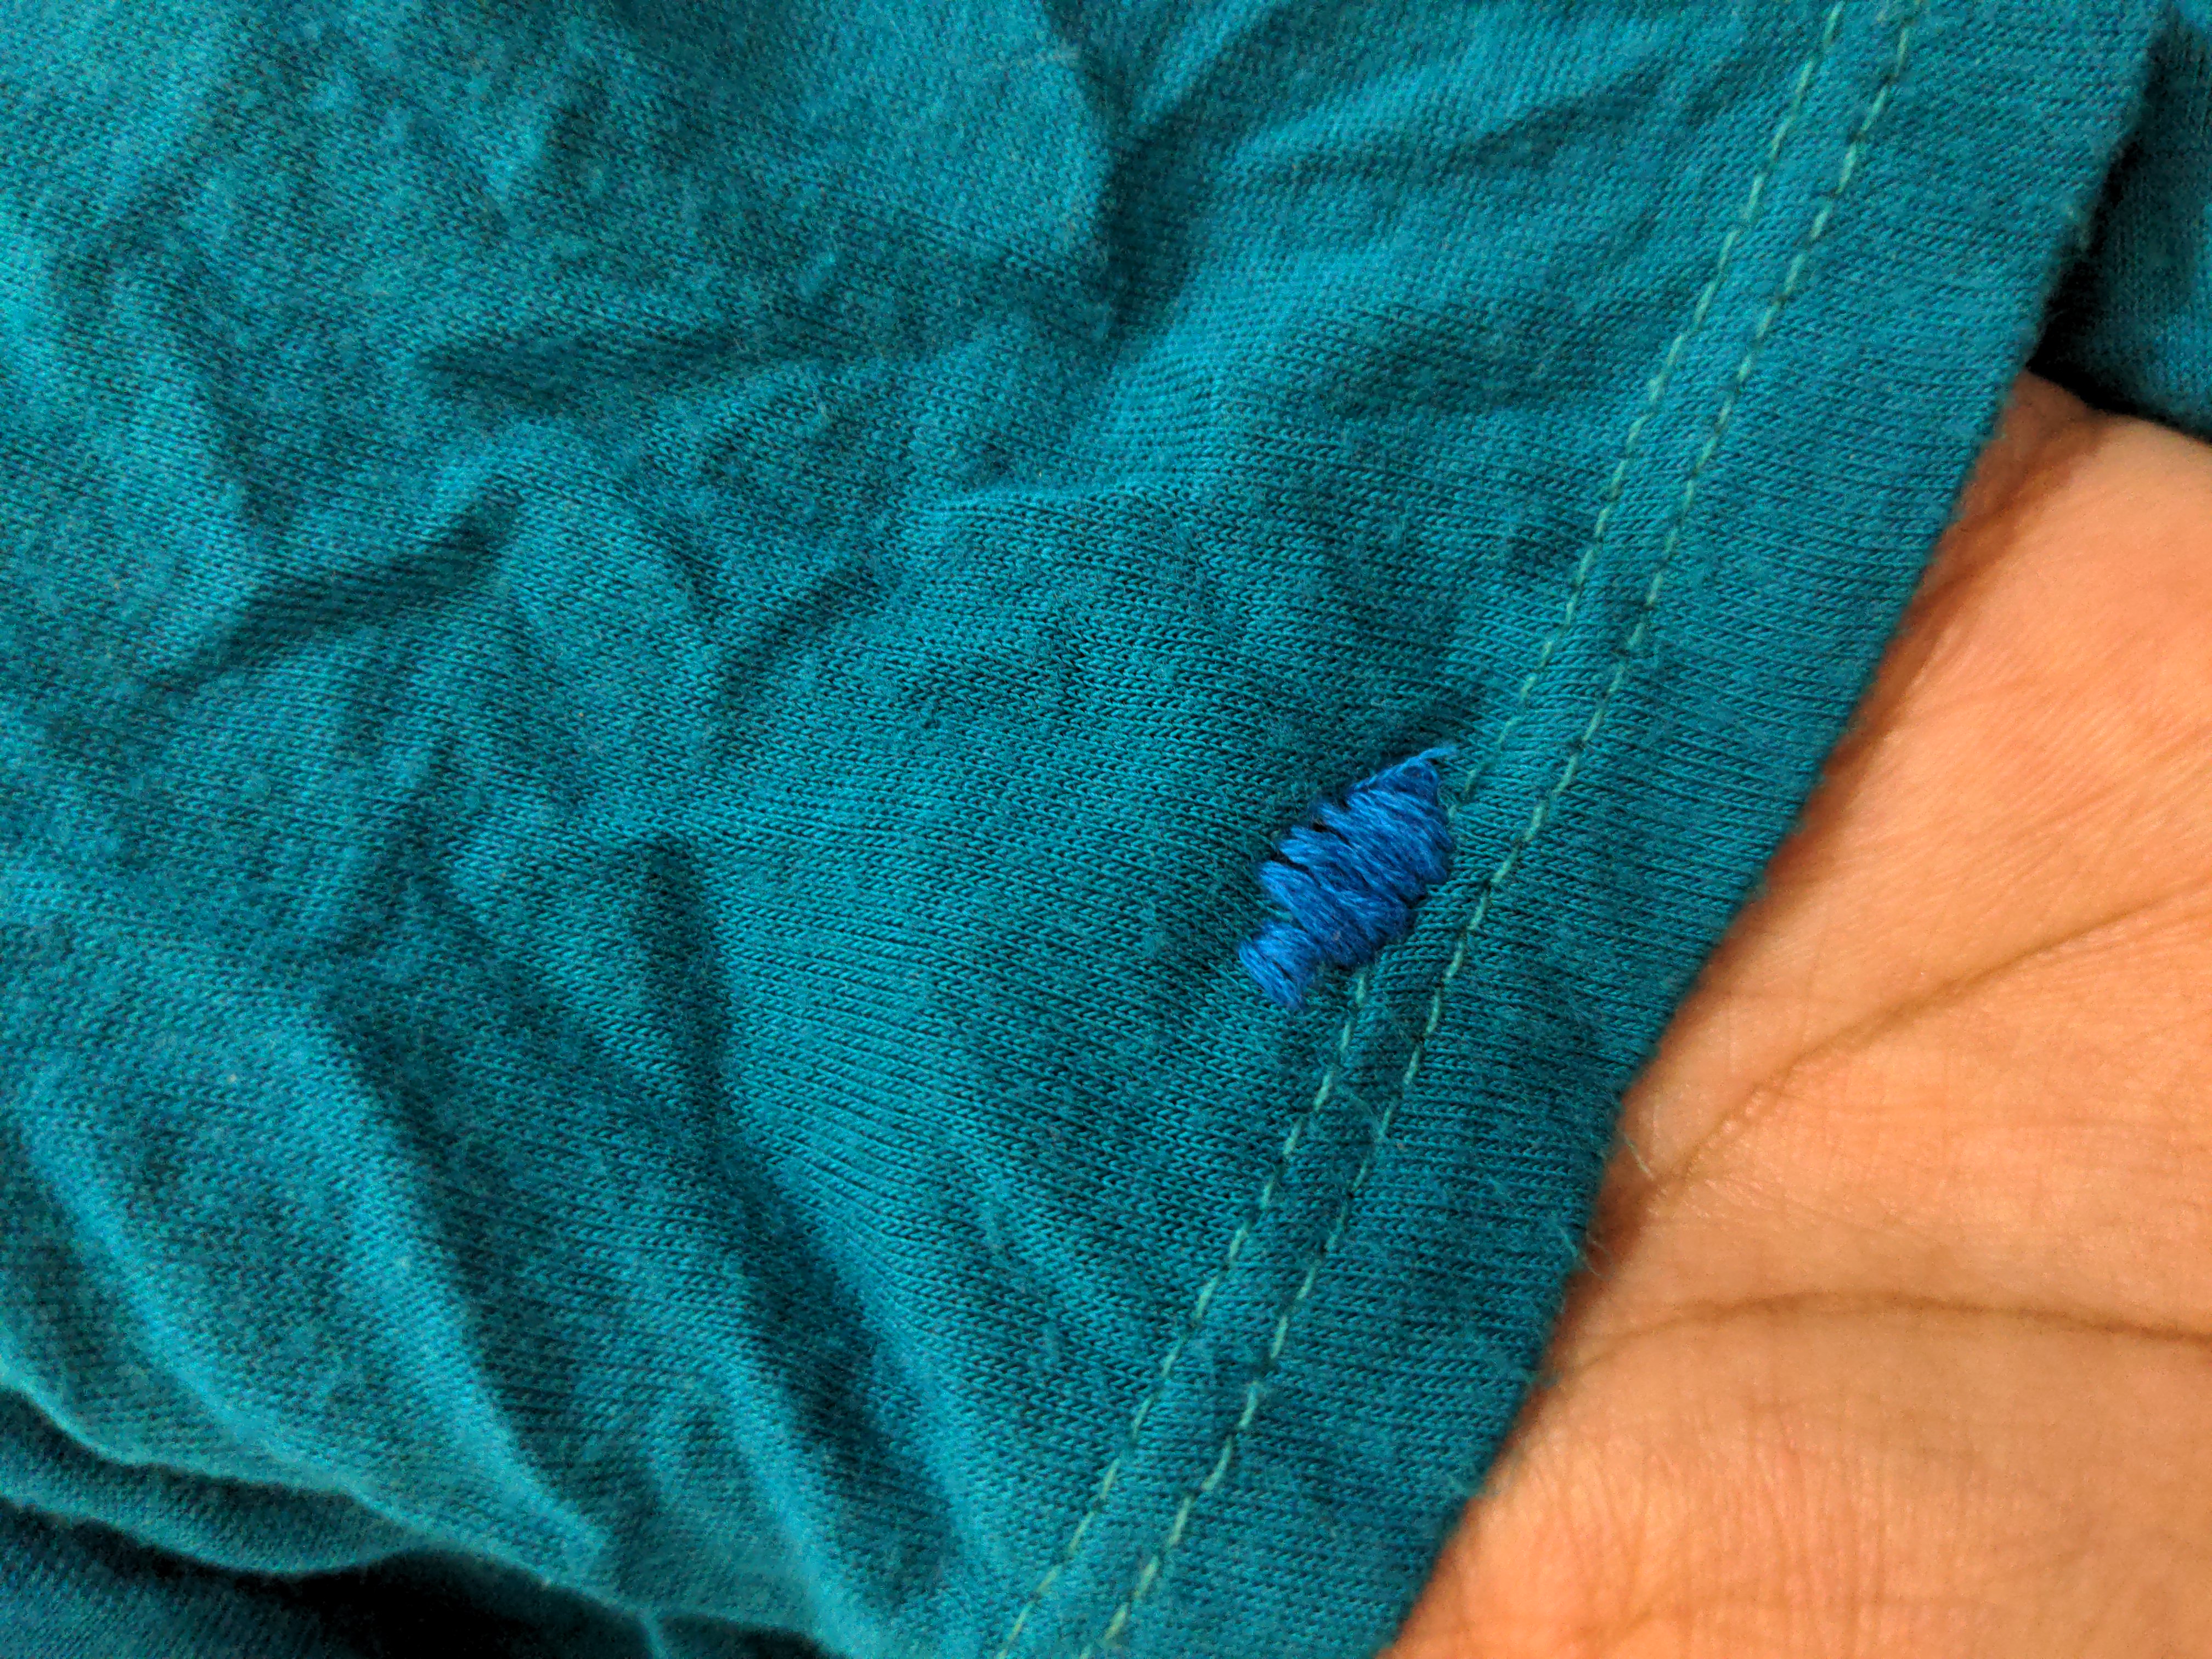 blue stitches cover the area where the pins were